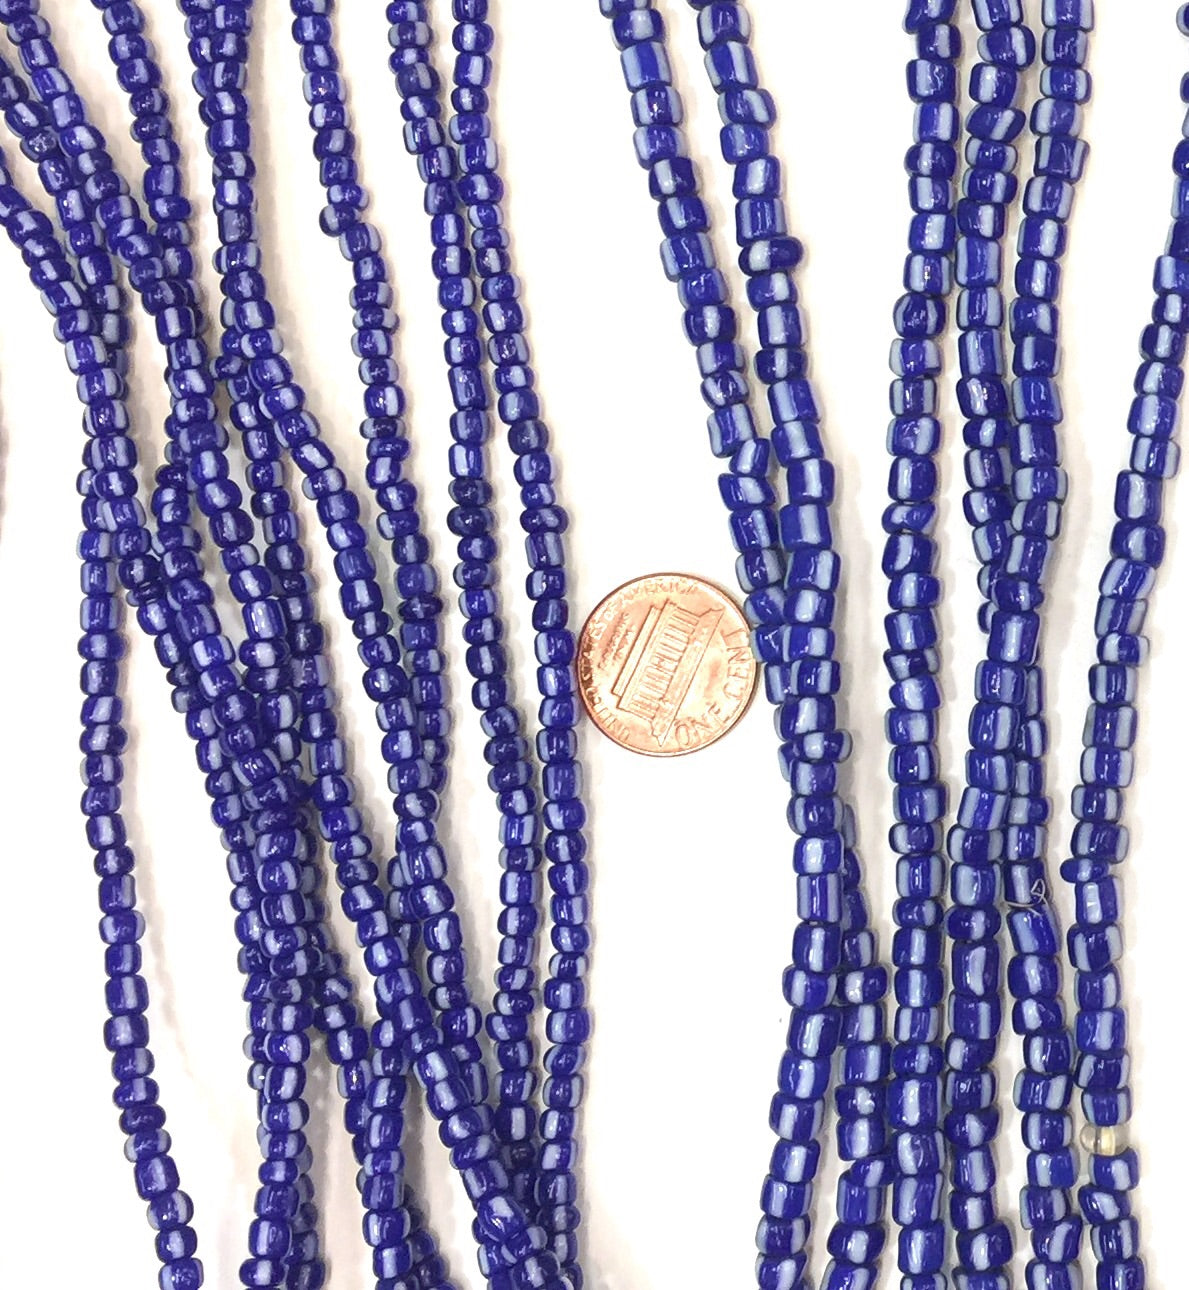 Vintage Electric Blue and White Striped Small Ghana Glass Beads 5mm,